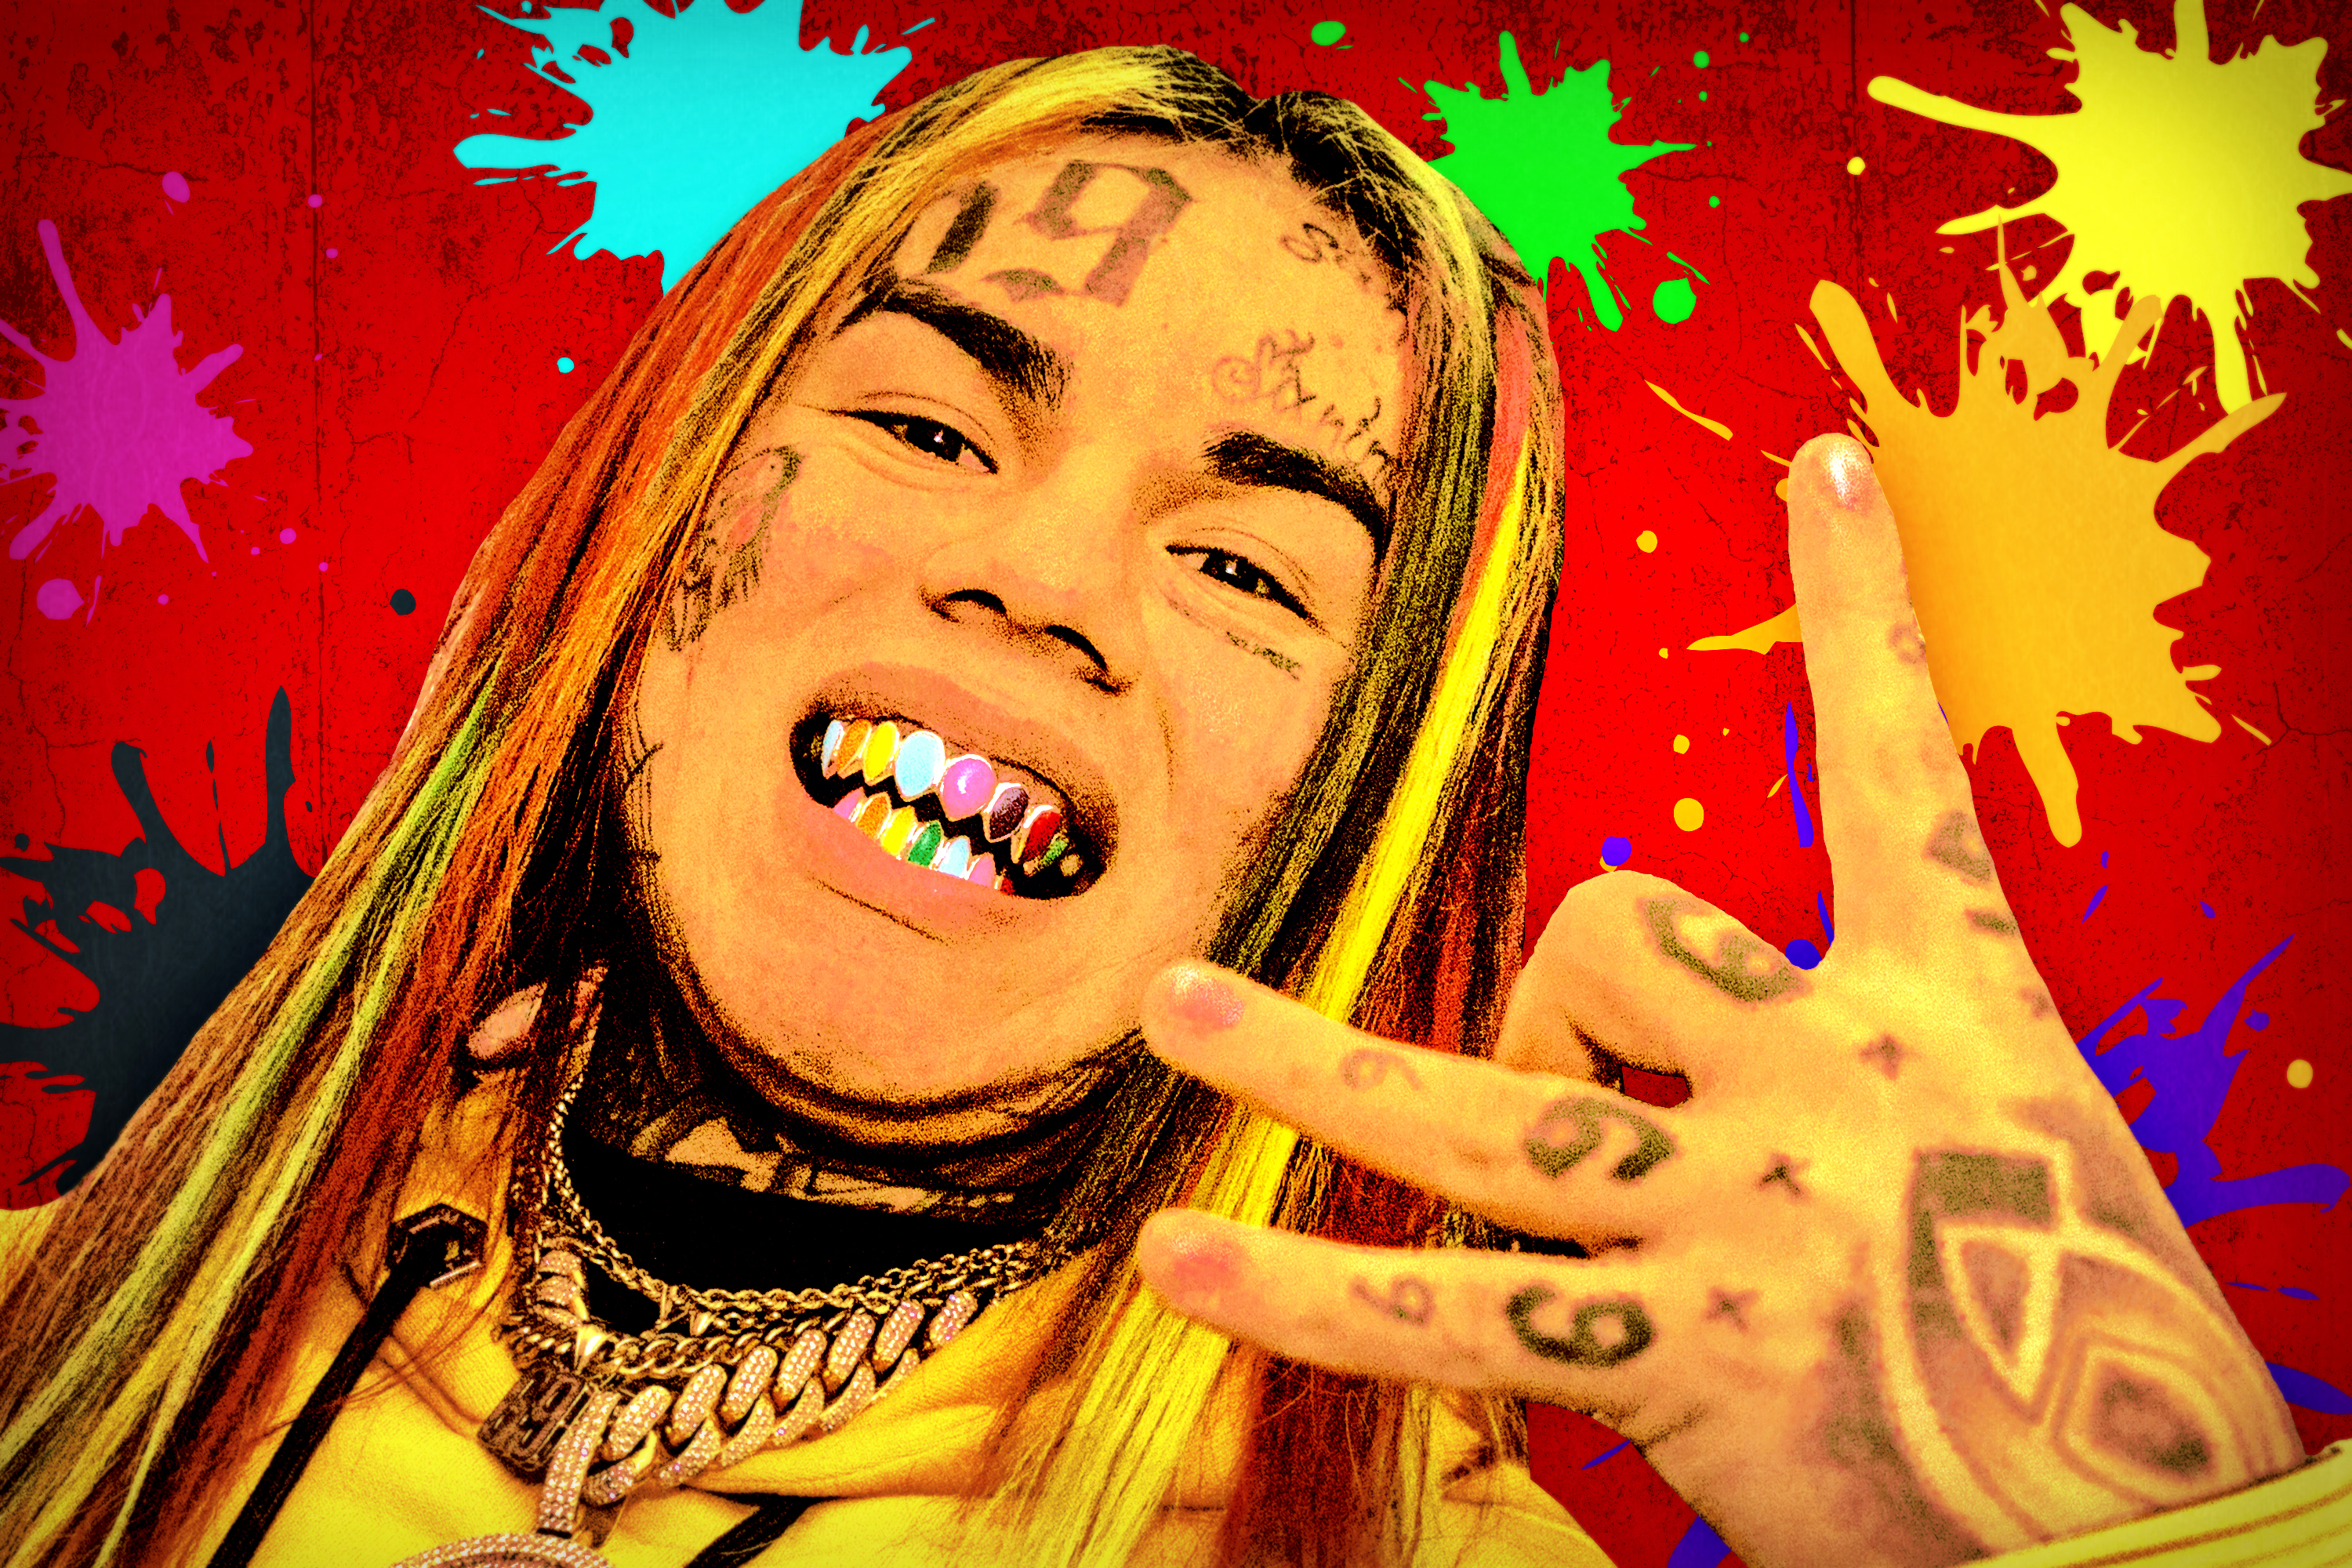 Meet 6ix9ine The First Rap Star of Is Easy to Hate